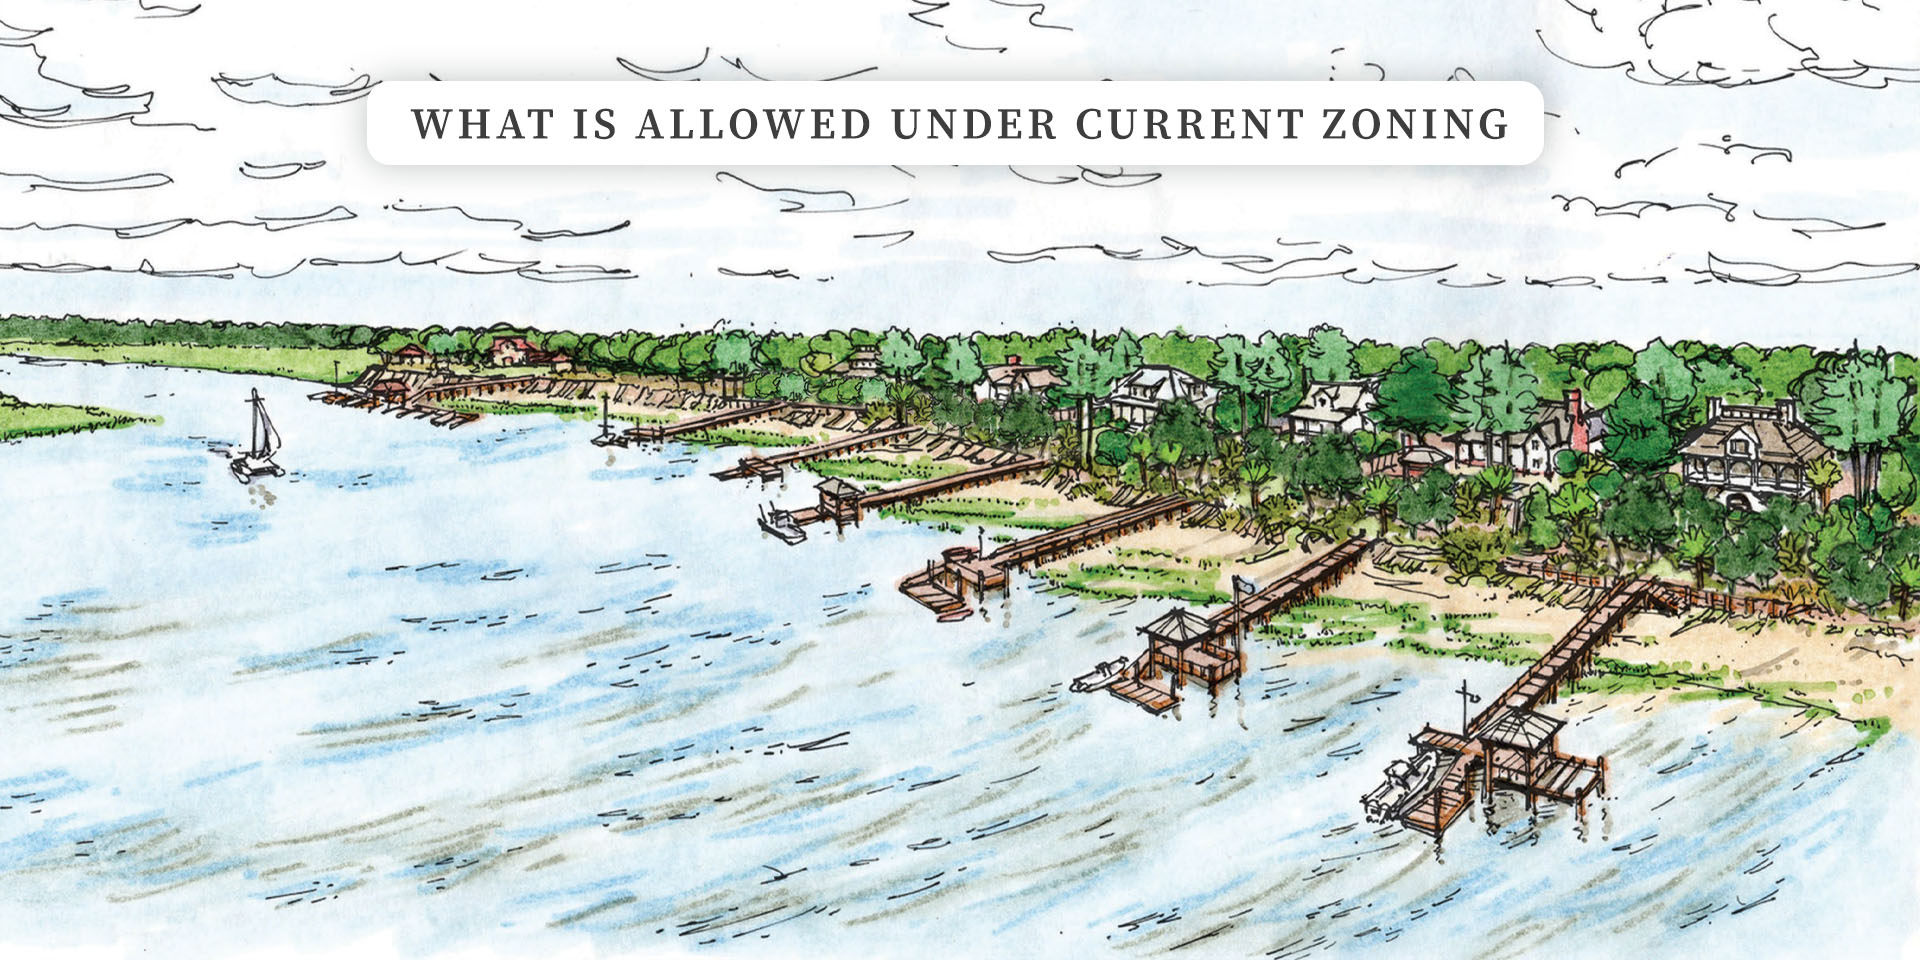 Along Morgan River: What Is Allowed Under Current Zoning